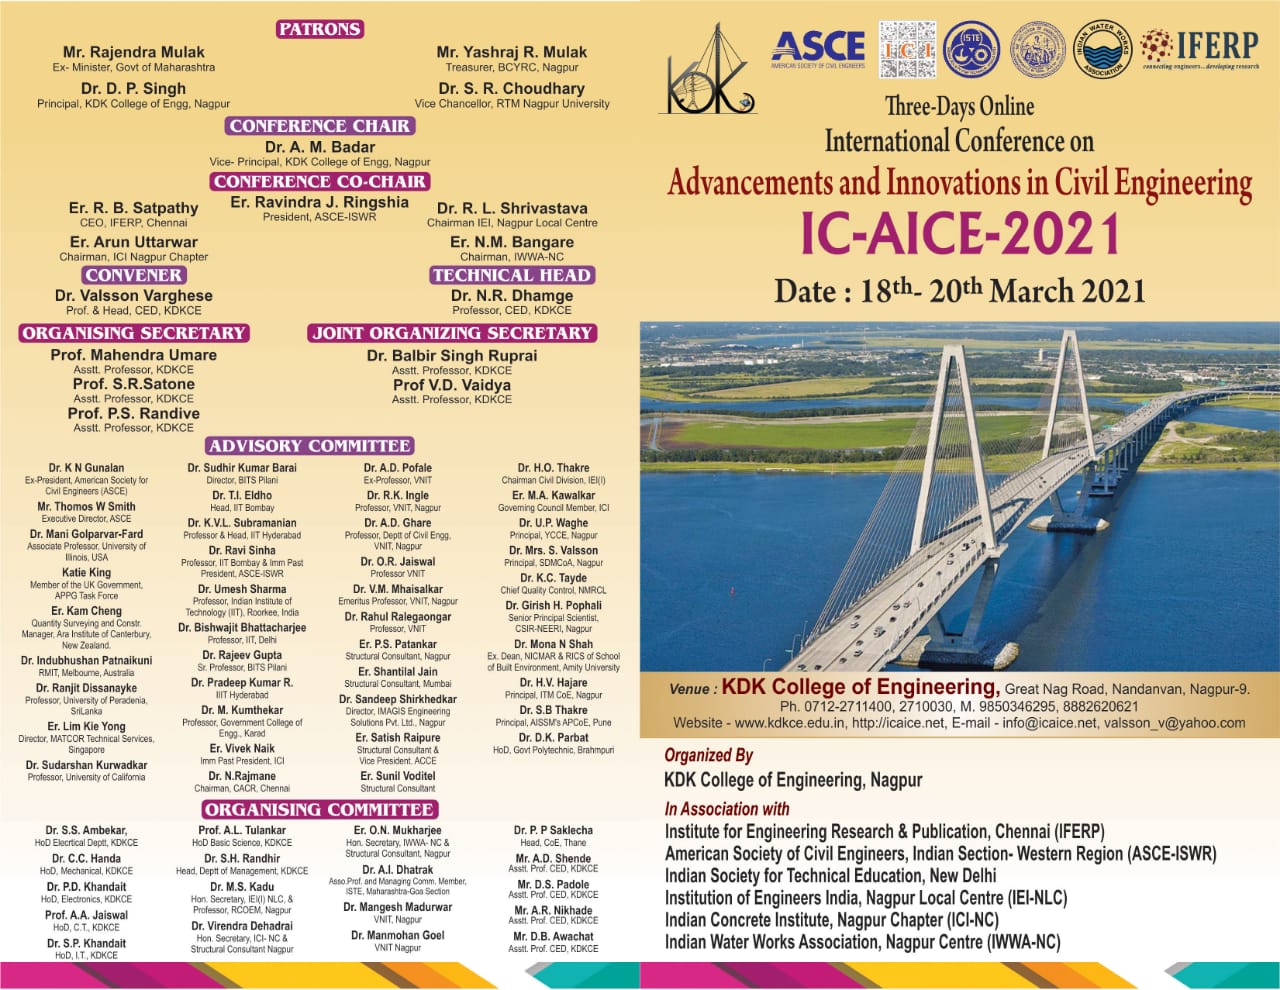 International Conference on “Advancements and Innovations in Civil